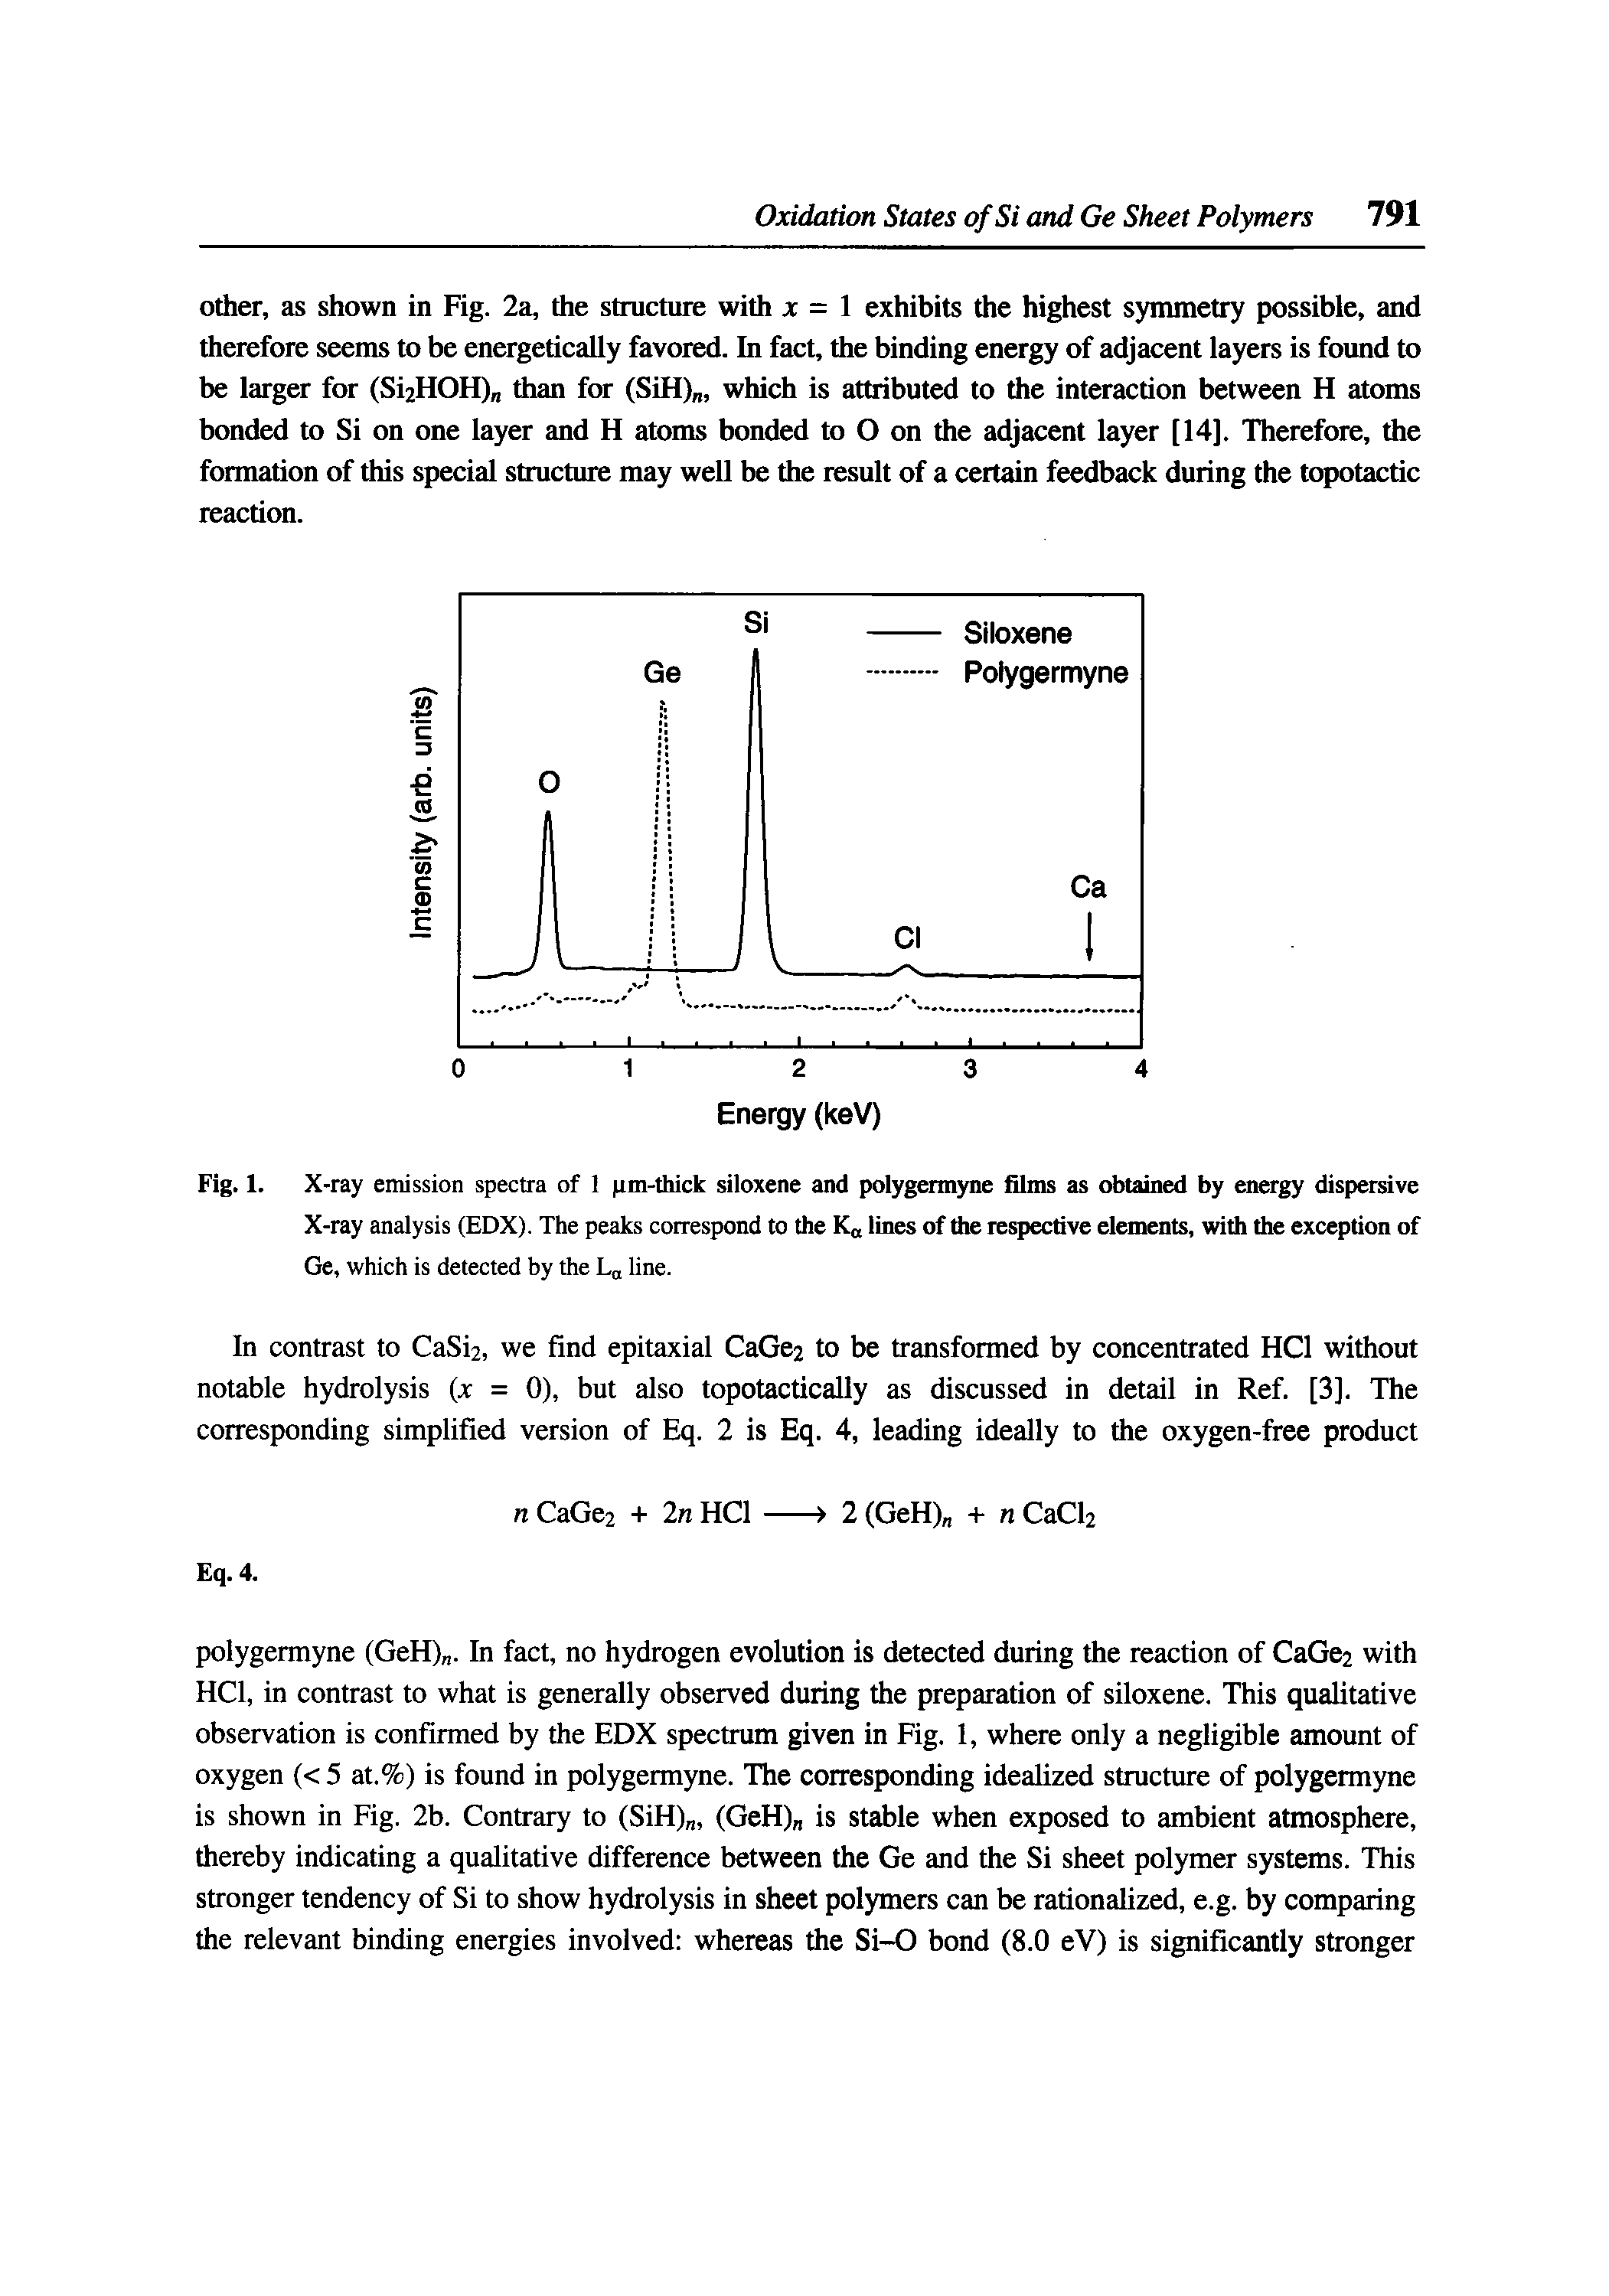 Fig. 1. X-ray emission spectra of 1 pm-thick siloxene and poiygermyne films as obtained by energy dispersive X-ray analysis (EDX). The peaks correspond to the K lines of the respective elements, with the exception of...